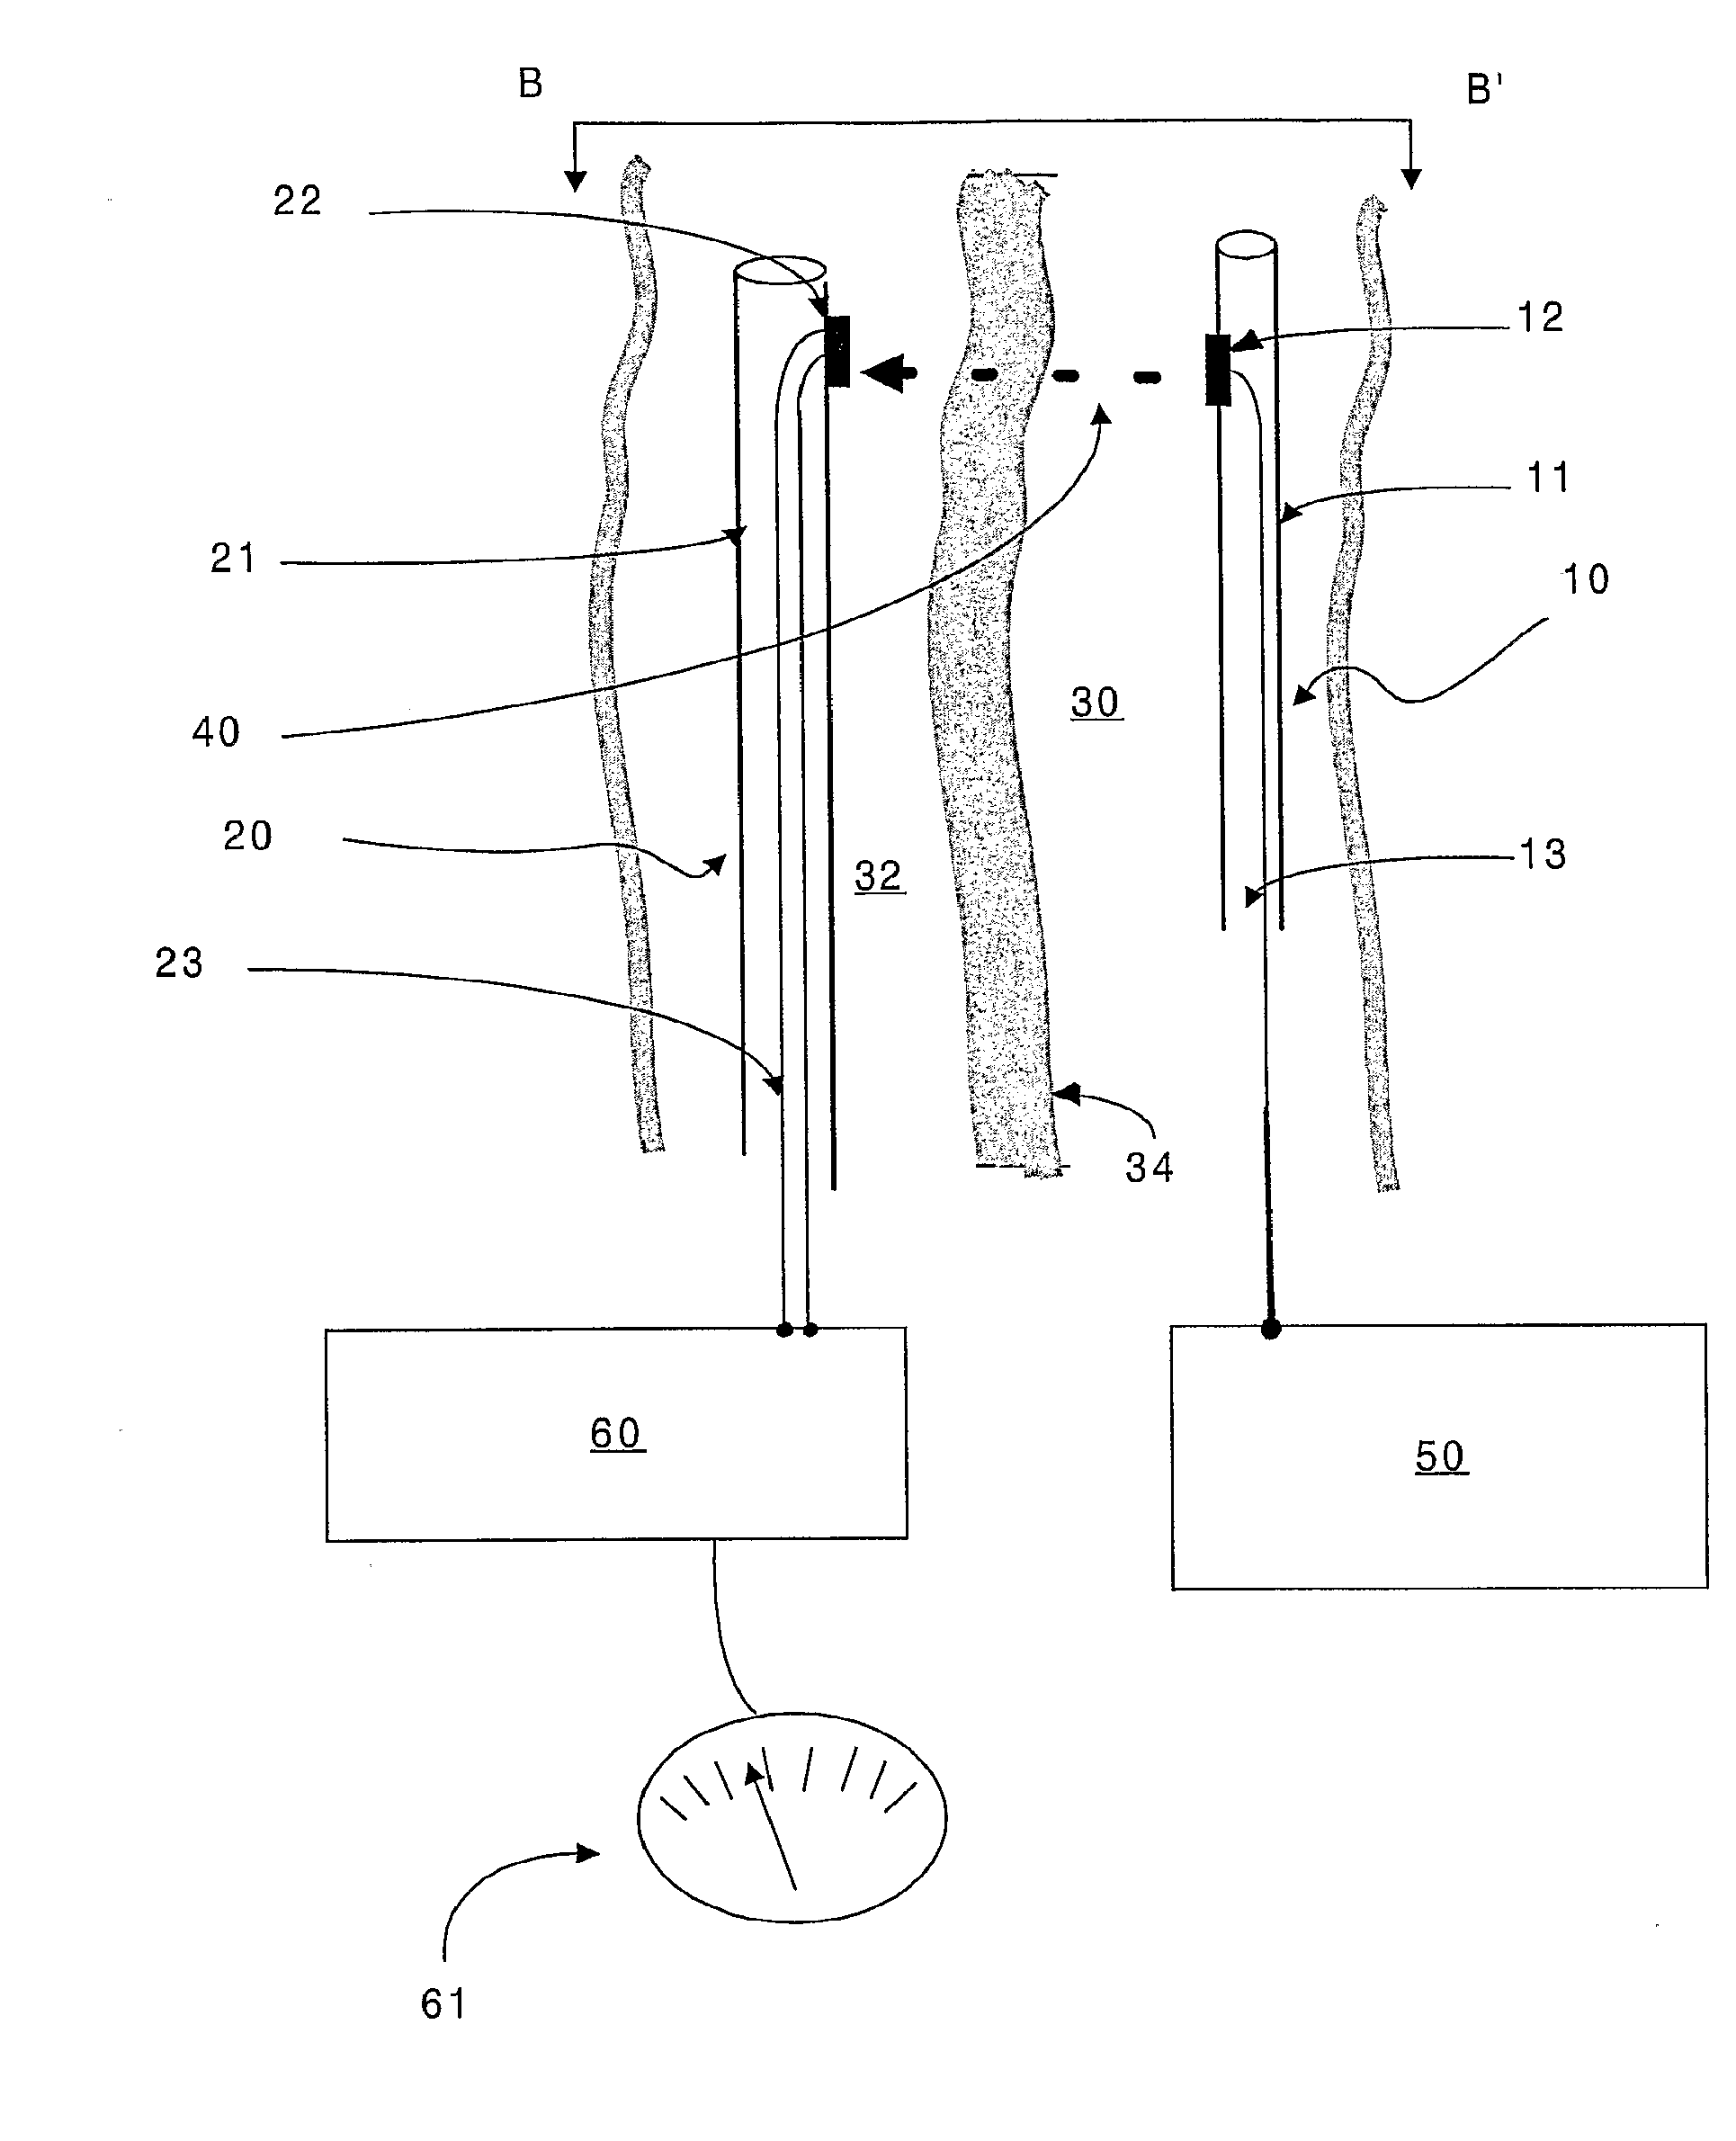 Minimally invasive surgical apparatus and methods